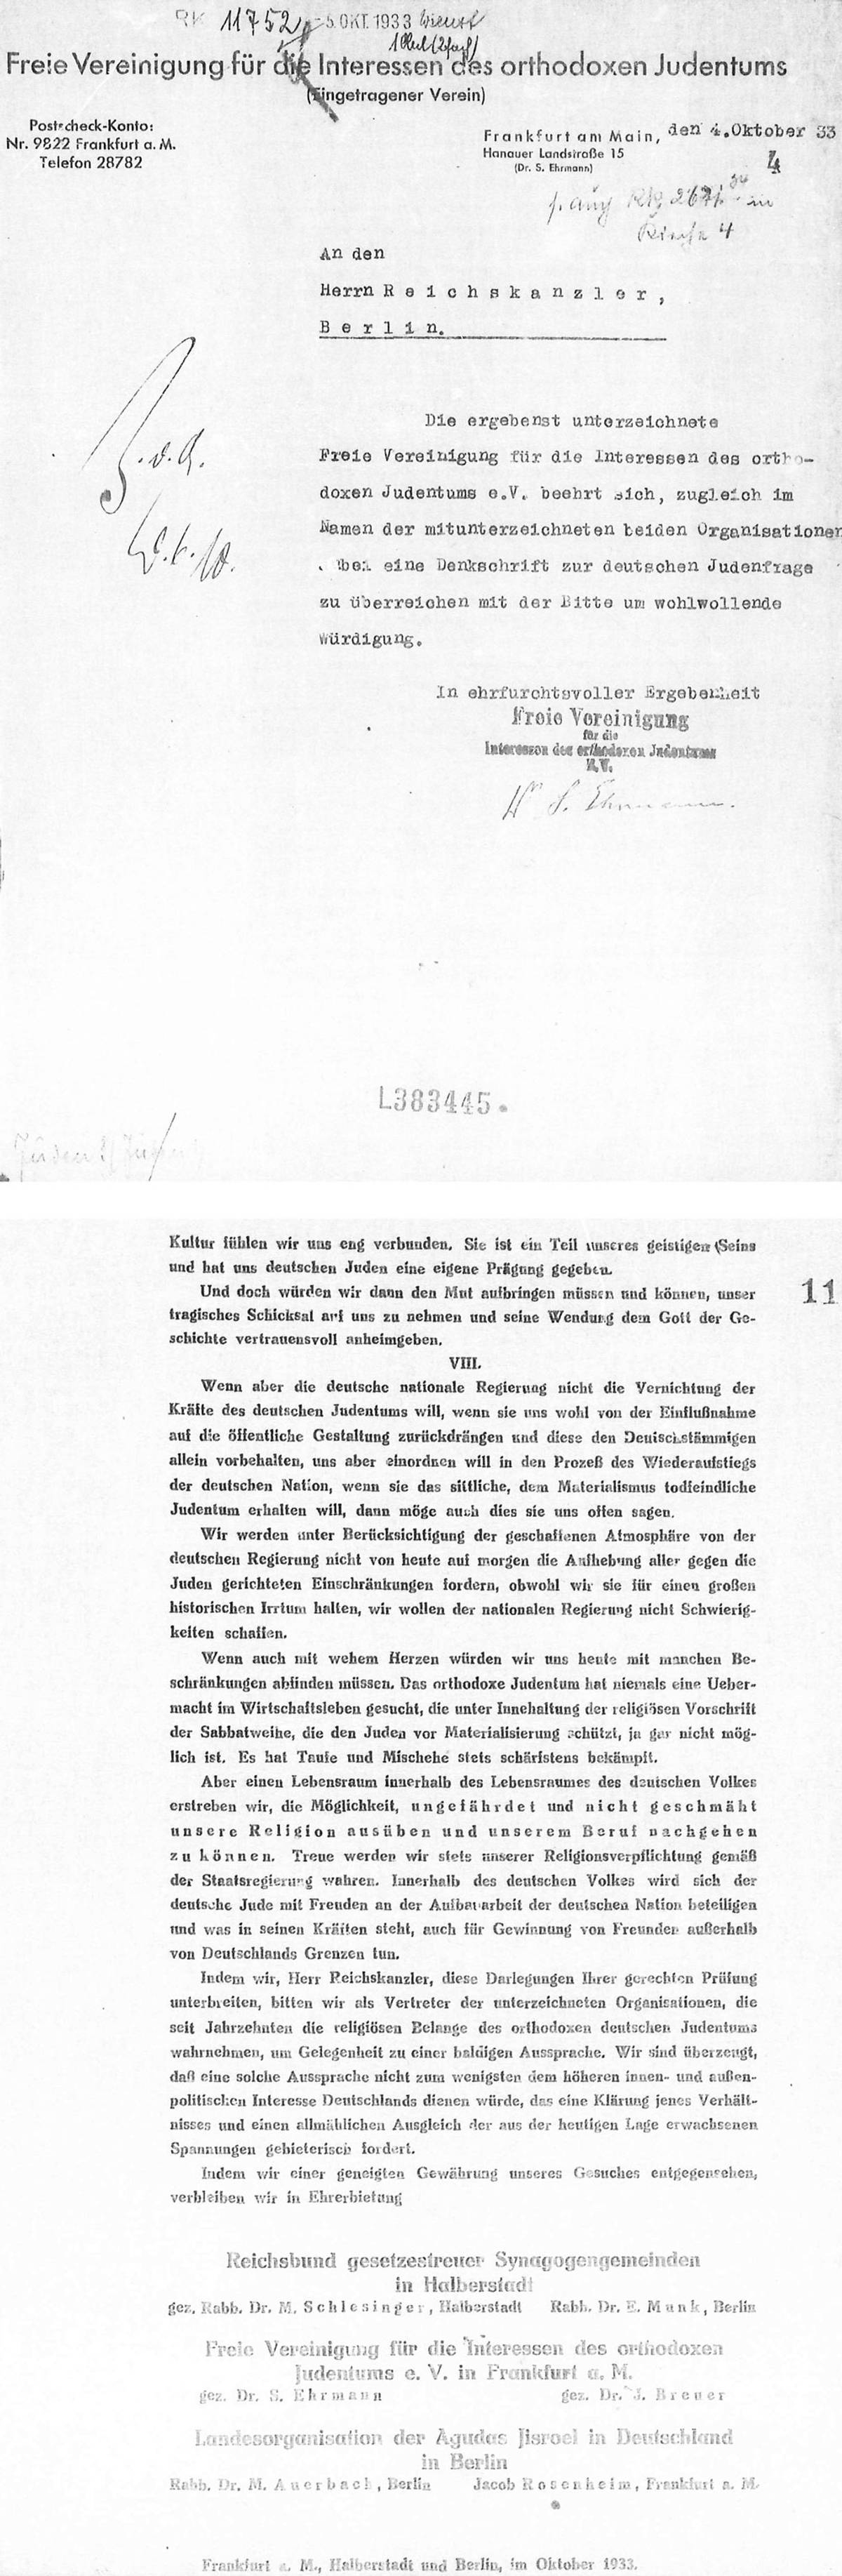 Memorandum sent from the Free Association for the Interests of Orthodox Judaism, Reich Alliance of Law Abiding Synagogue Communities in Halberstadt, and National Agudat Israel Organization in Germany to the Herr Reich Chancellor on Oct. 4, 1933. Courtesy of Bundesarchiv, Potsdam, R 43 II / 602